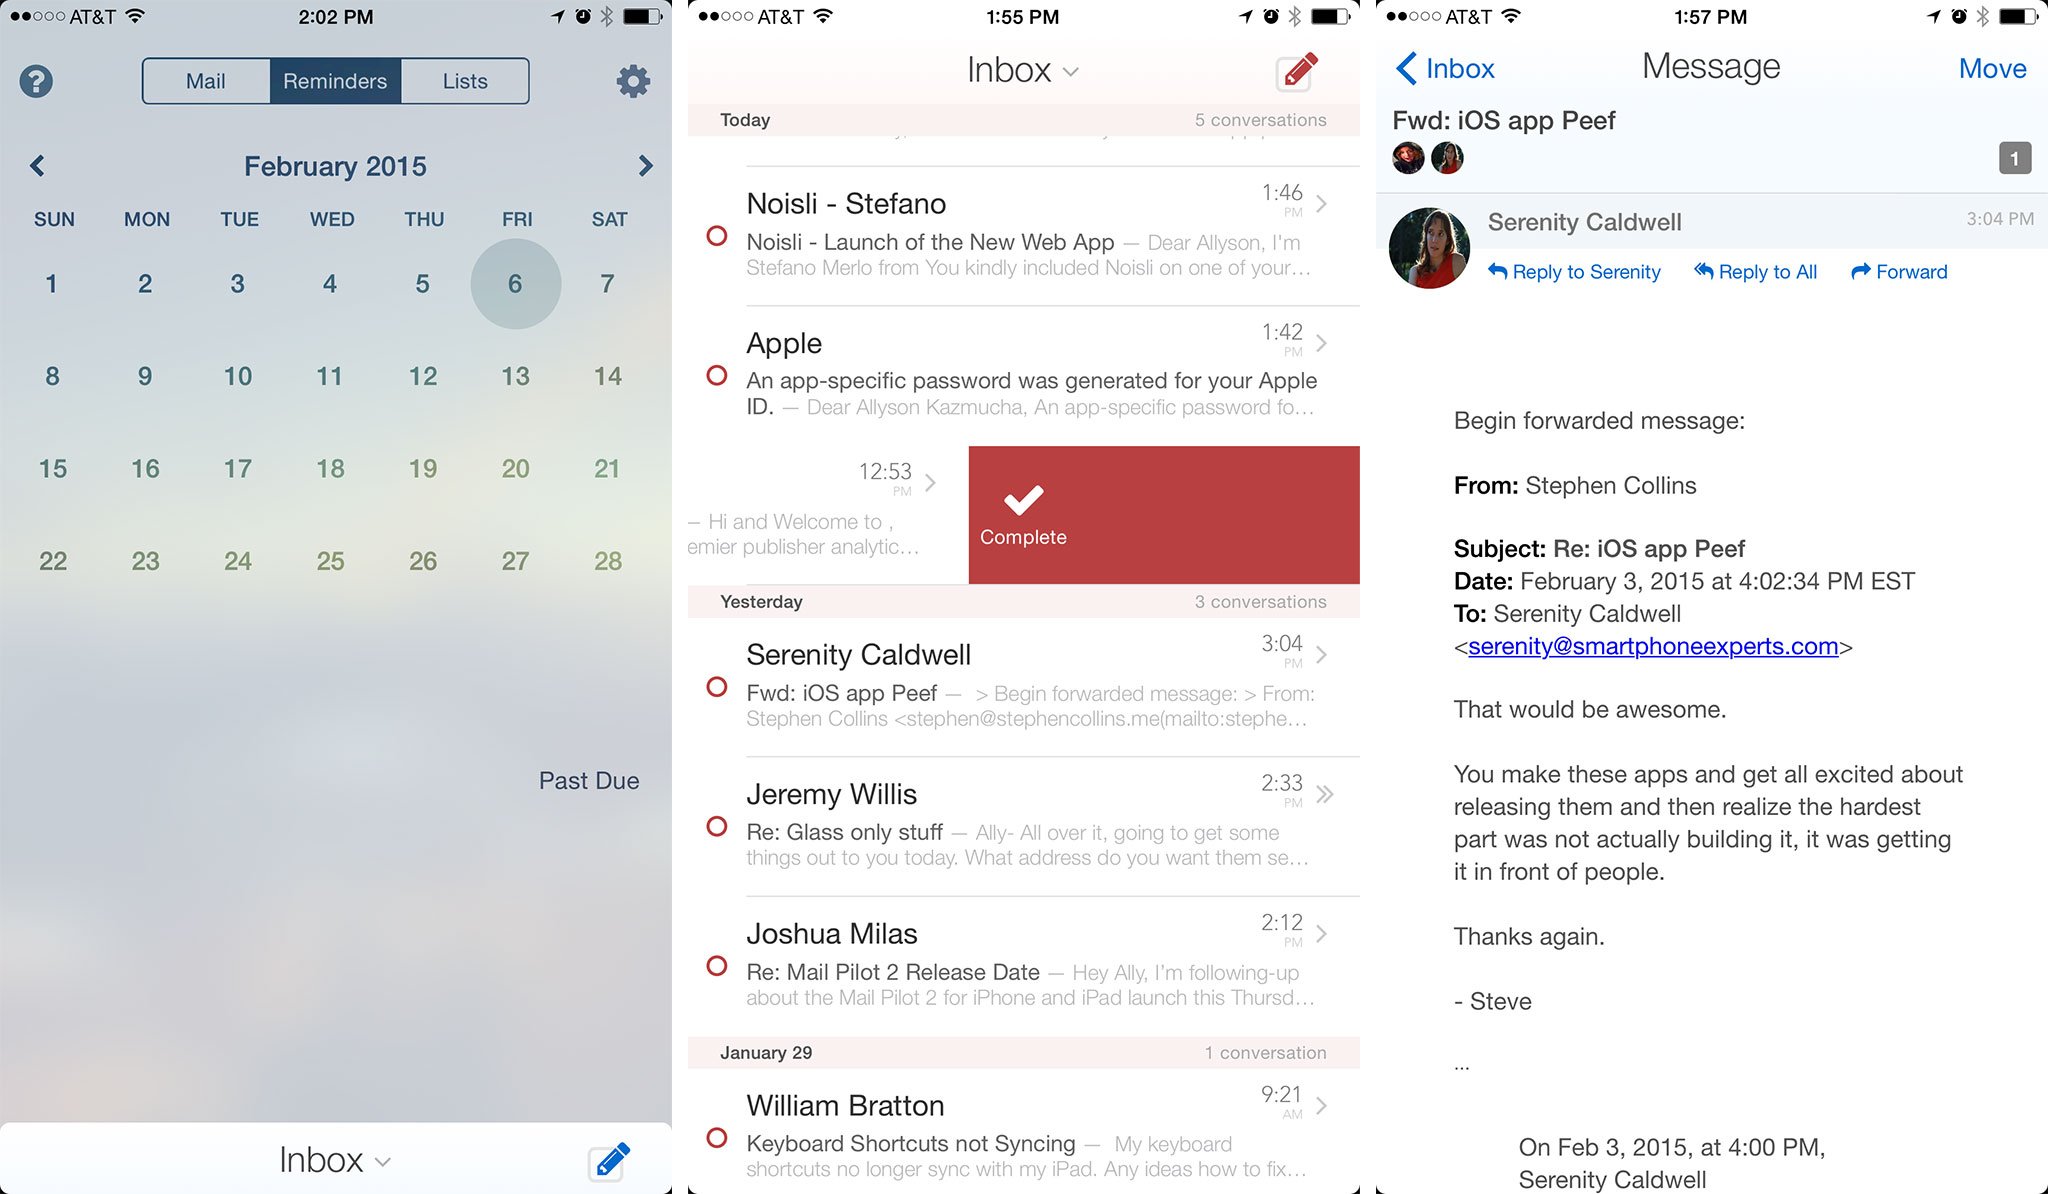 Mail Pilot 2 for iPhone and iPad review